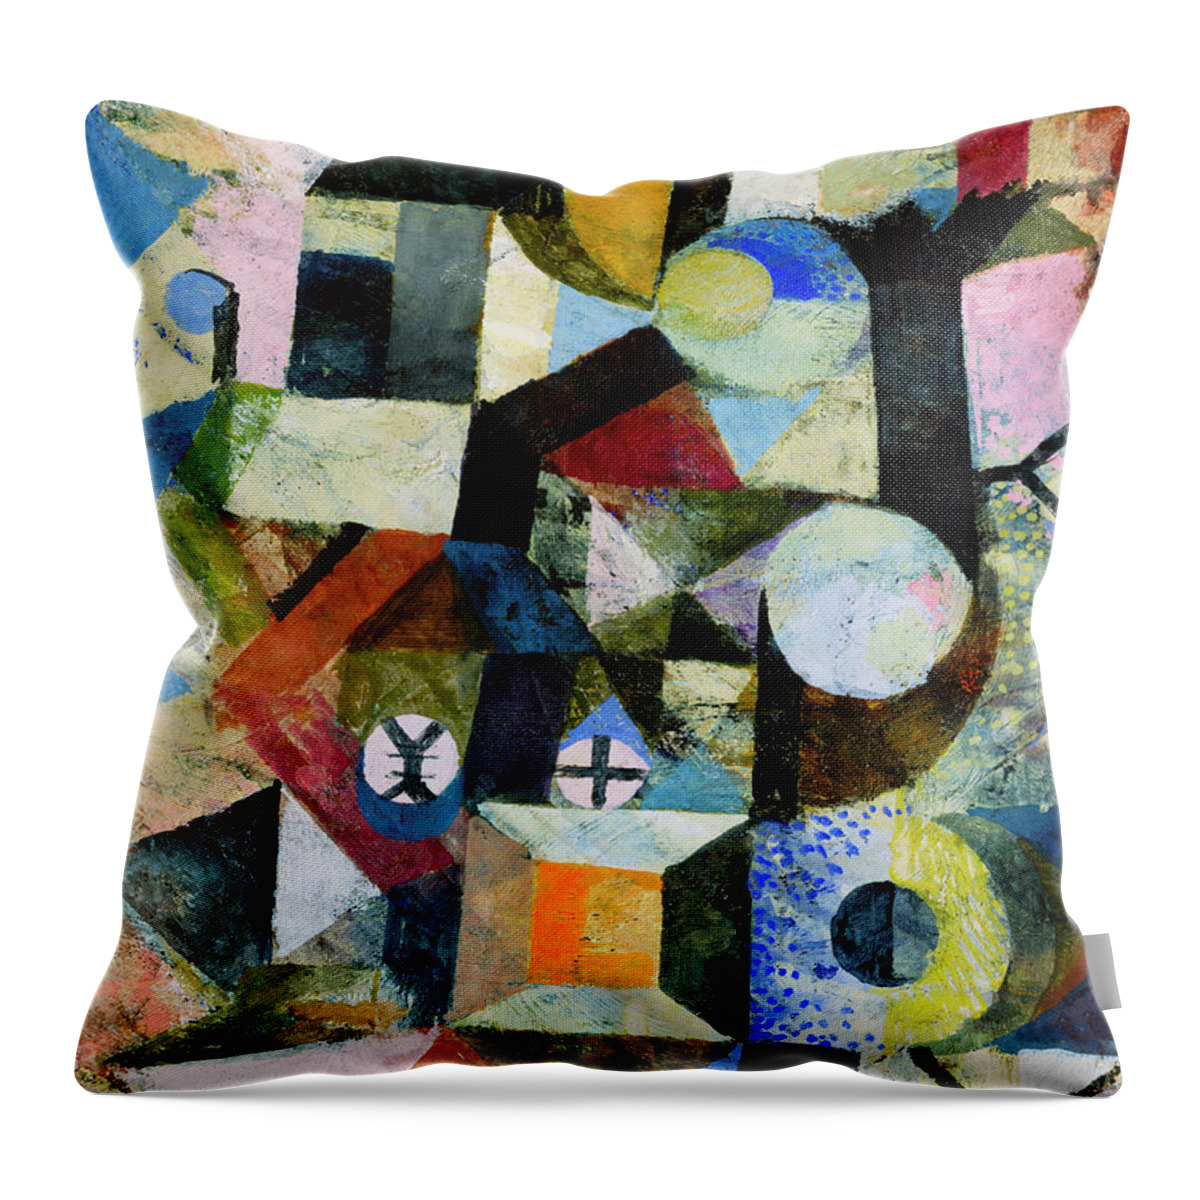 Paul Klee Throw Pillow featuring the painting Composition with the Yellow Half-Moon and the Y by Paul Klee by Mango Art